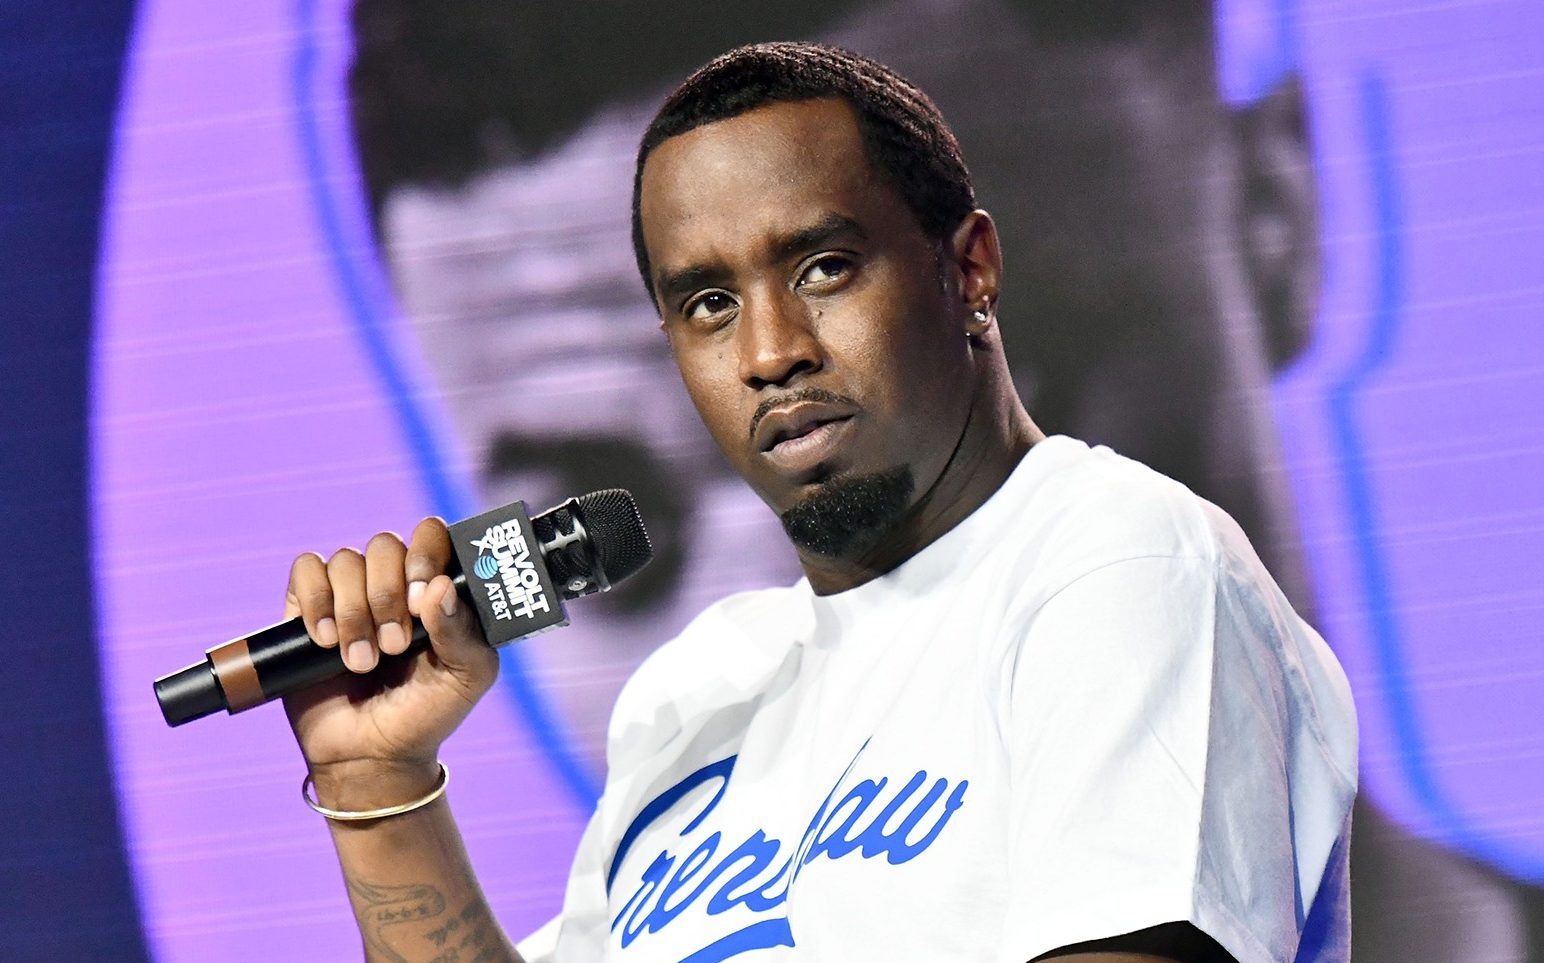 Diddy Claims Sean John Stole His Image & Sues For $25 Million